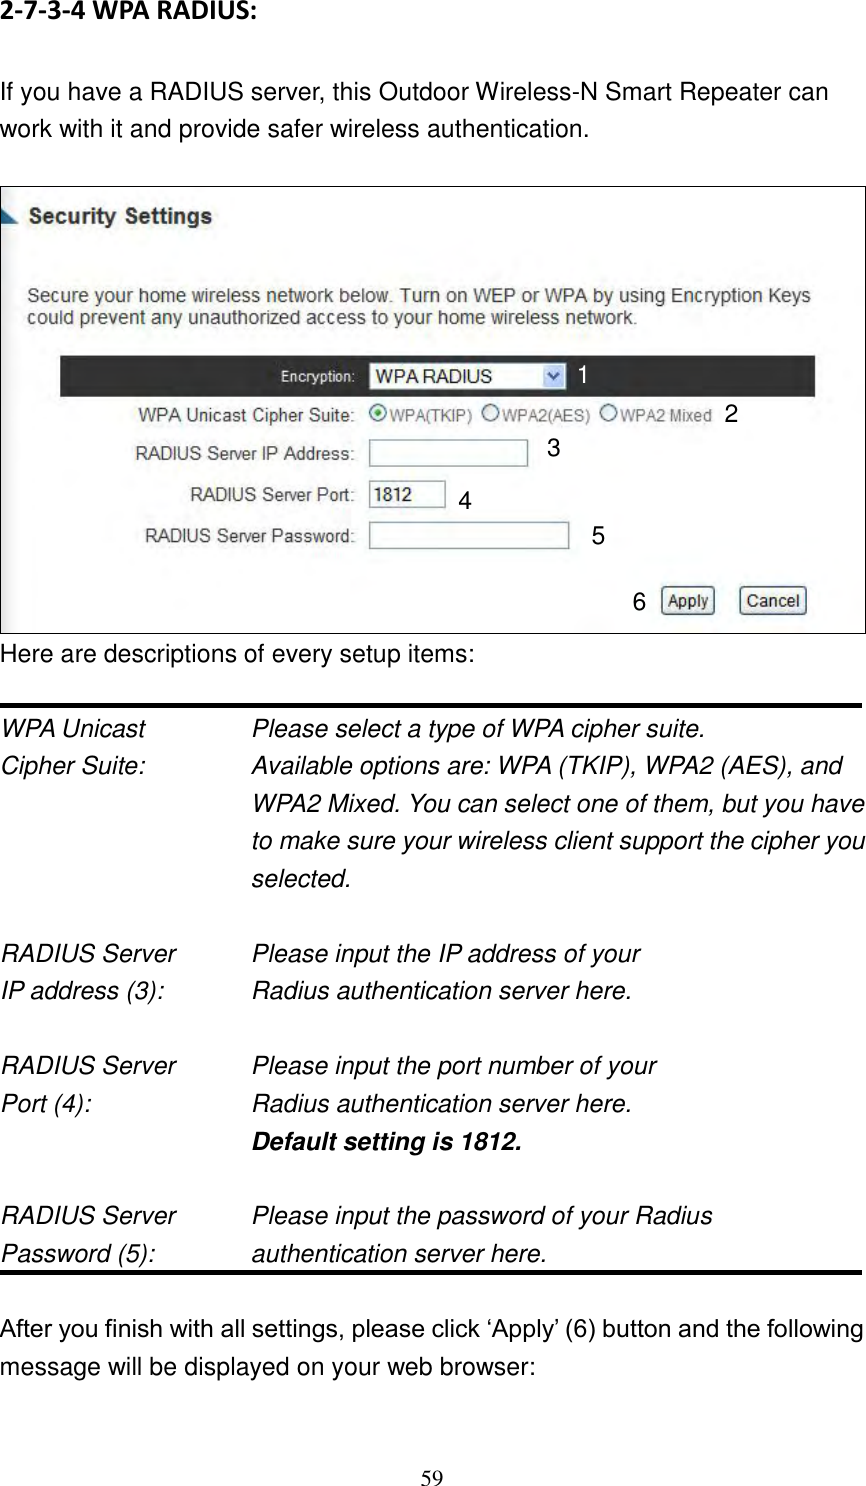 59 2-7-3-4 WPA RADIUS:  If you have a RADIUS server, this Outdoor Wireless-N Smart Repeater can work with it and provide safer wireless authentication.   Here are descriptions of every setup items:  WPA Unicast      Please select a type of WPA cipher suite. Cipher Suite:  Available options are: WPA (TKIP), WPA2 (AES), and WPA2 Mixed. You can select one of them, but you have to make sure your wireless client support the cipher you selected.  RADIUS Server      Please input the IP address of your IP address (3):      Radius authentication server here.  RADIUS Server      Please input the port number of your Port (4):    Radius authentication server here.   Default setting is 1812.  RADIUS Server      Please input the password of your Radius Password (5):    authentication server here.  After you finish with all settings, please click „Apply‟ (6) button and the following message will be displayed on your web browser:  1 3 4 2 5 6 